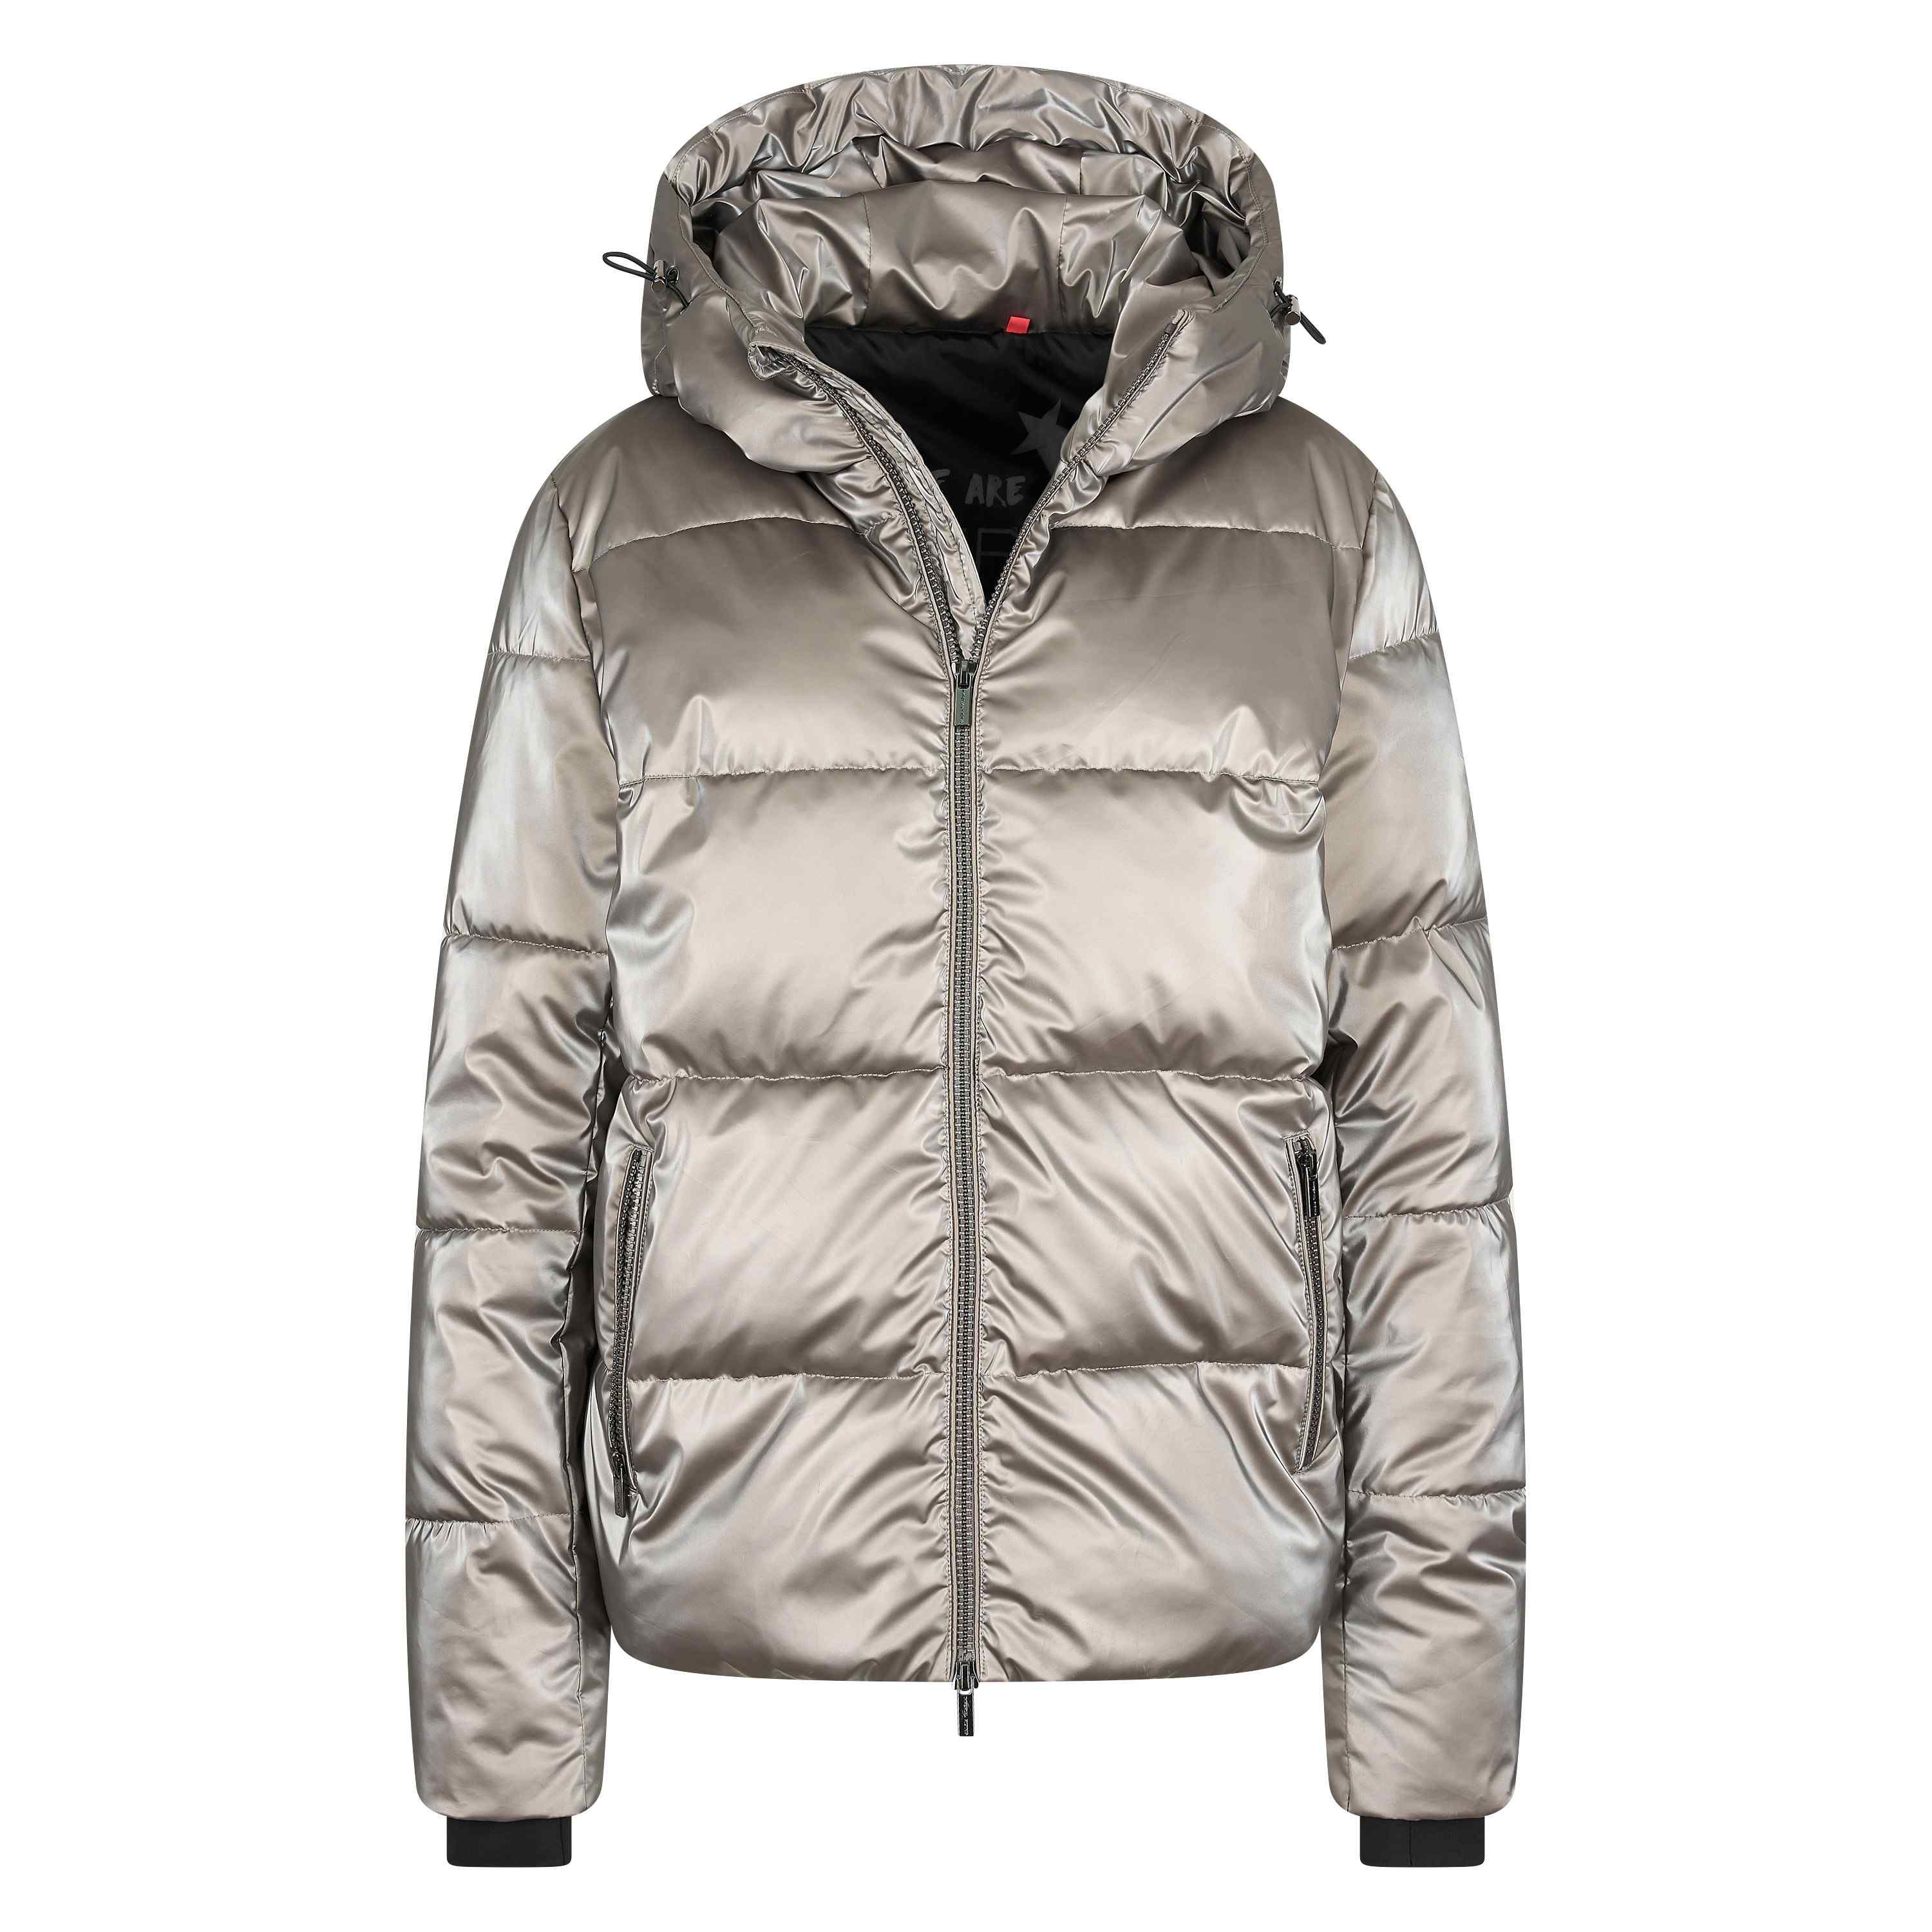 Imperial Riding Jacke IRHJazzy, Cappuccino